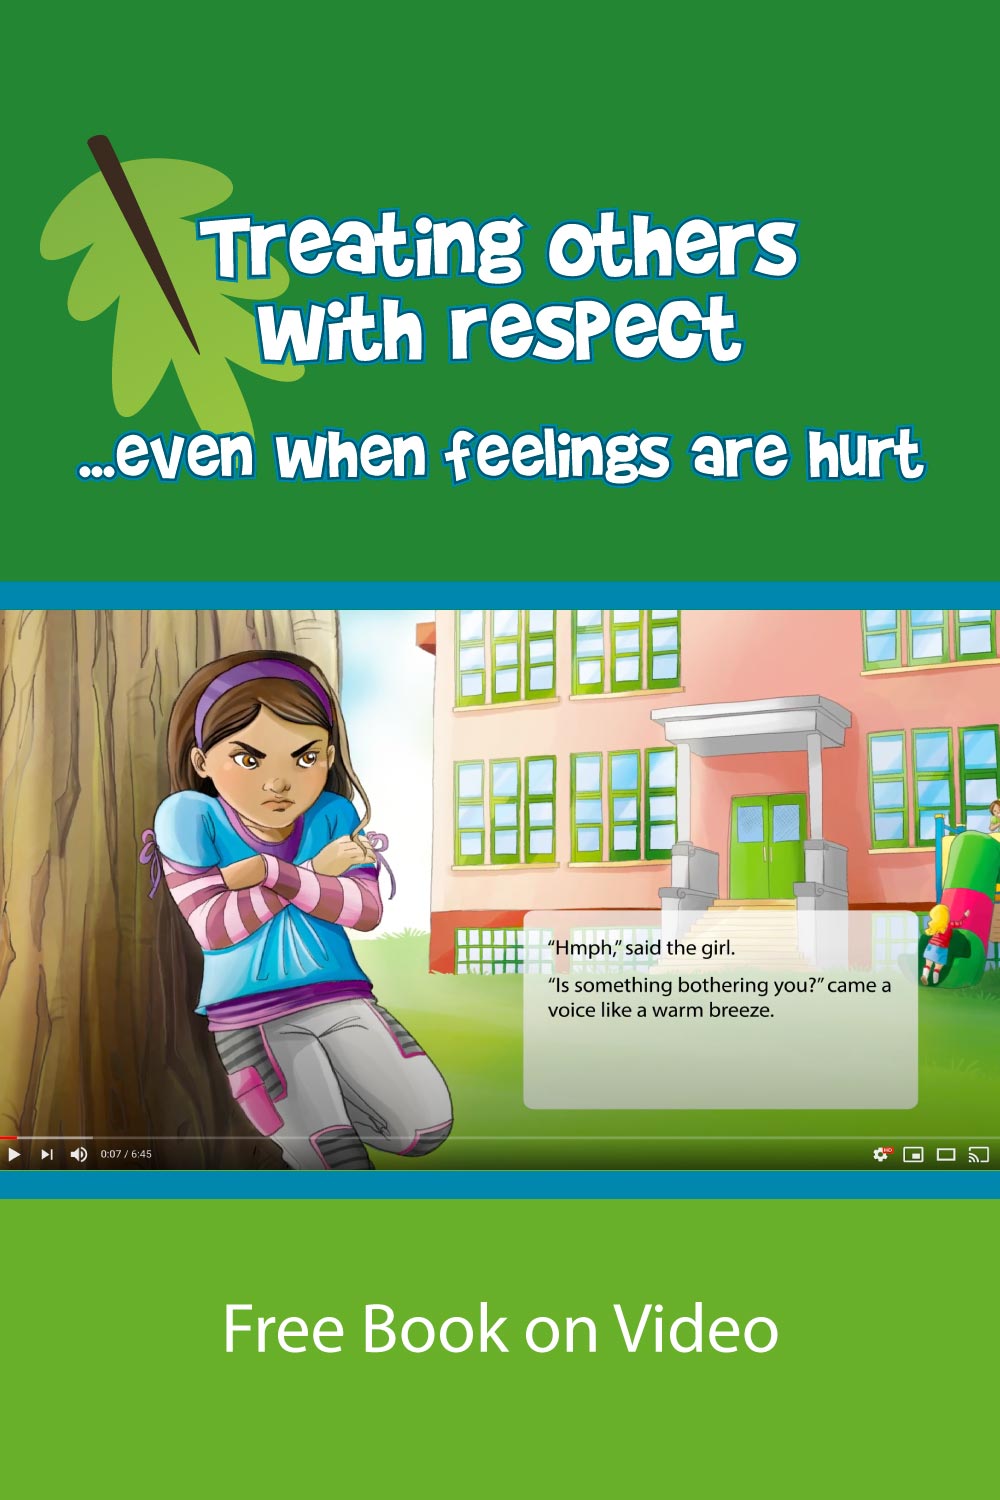 Free social emotional learning book on video- Be Bigger Talking with Trees